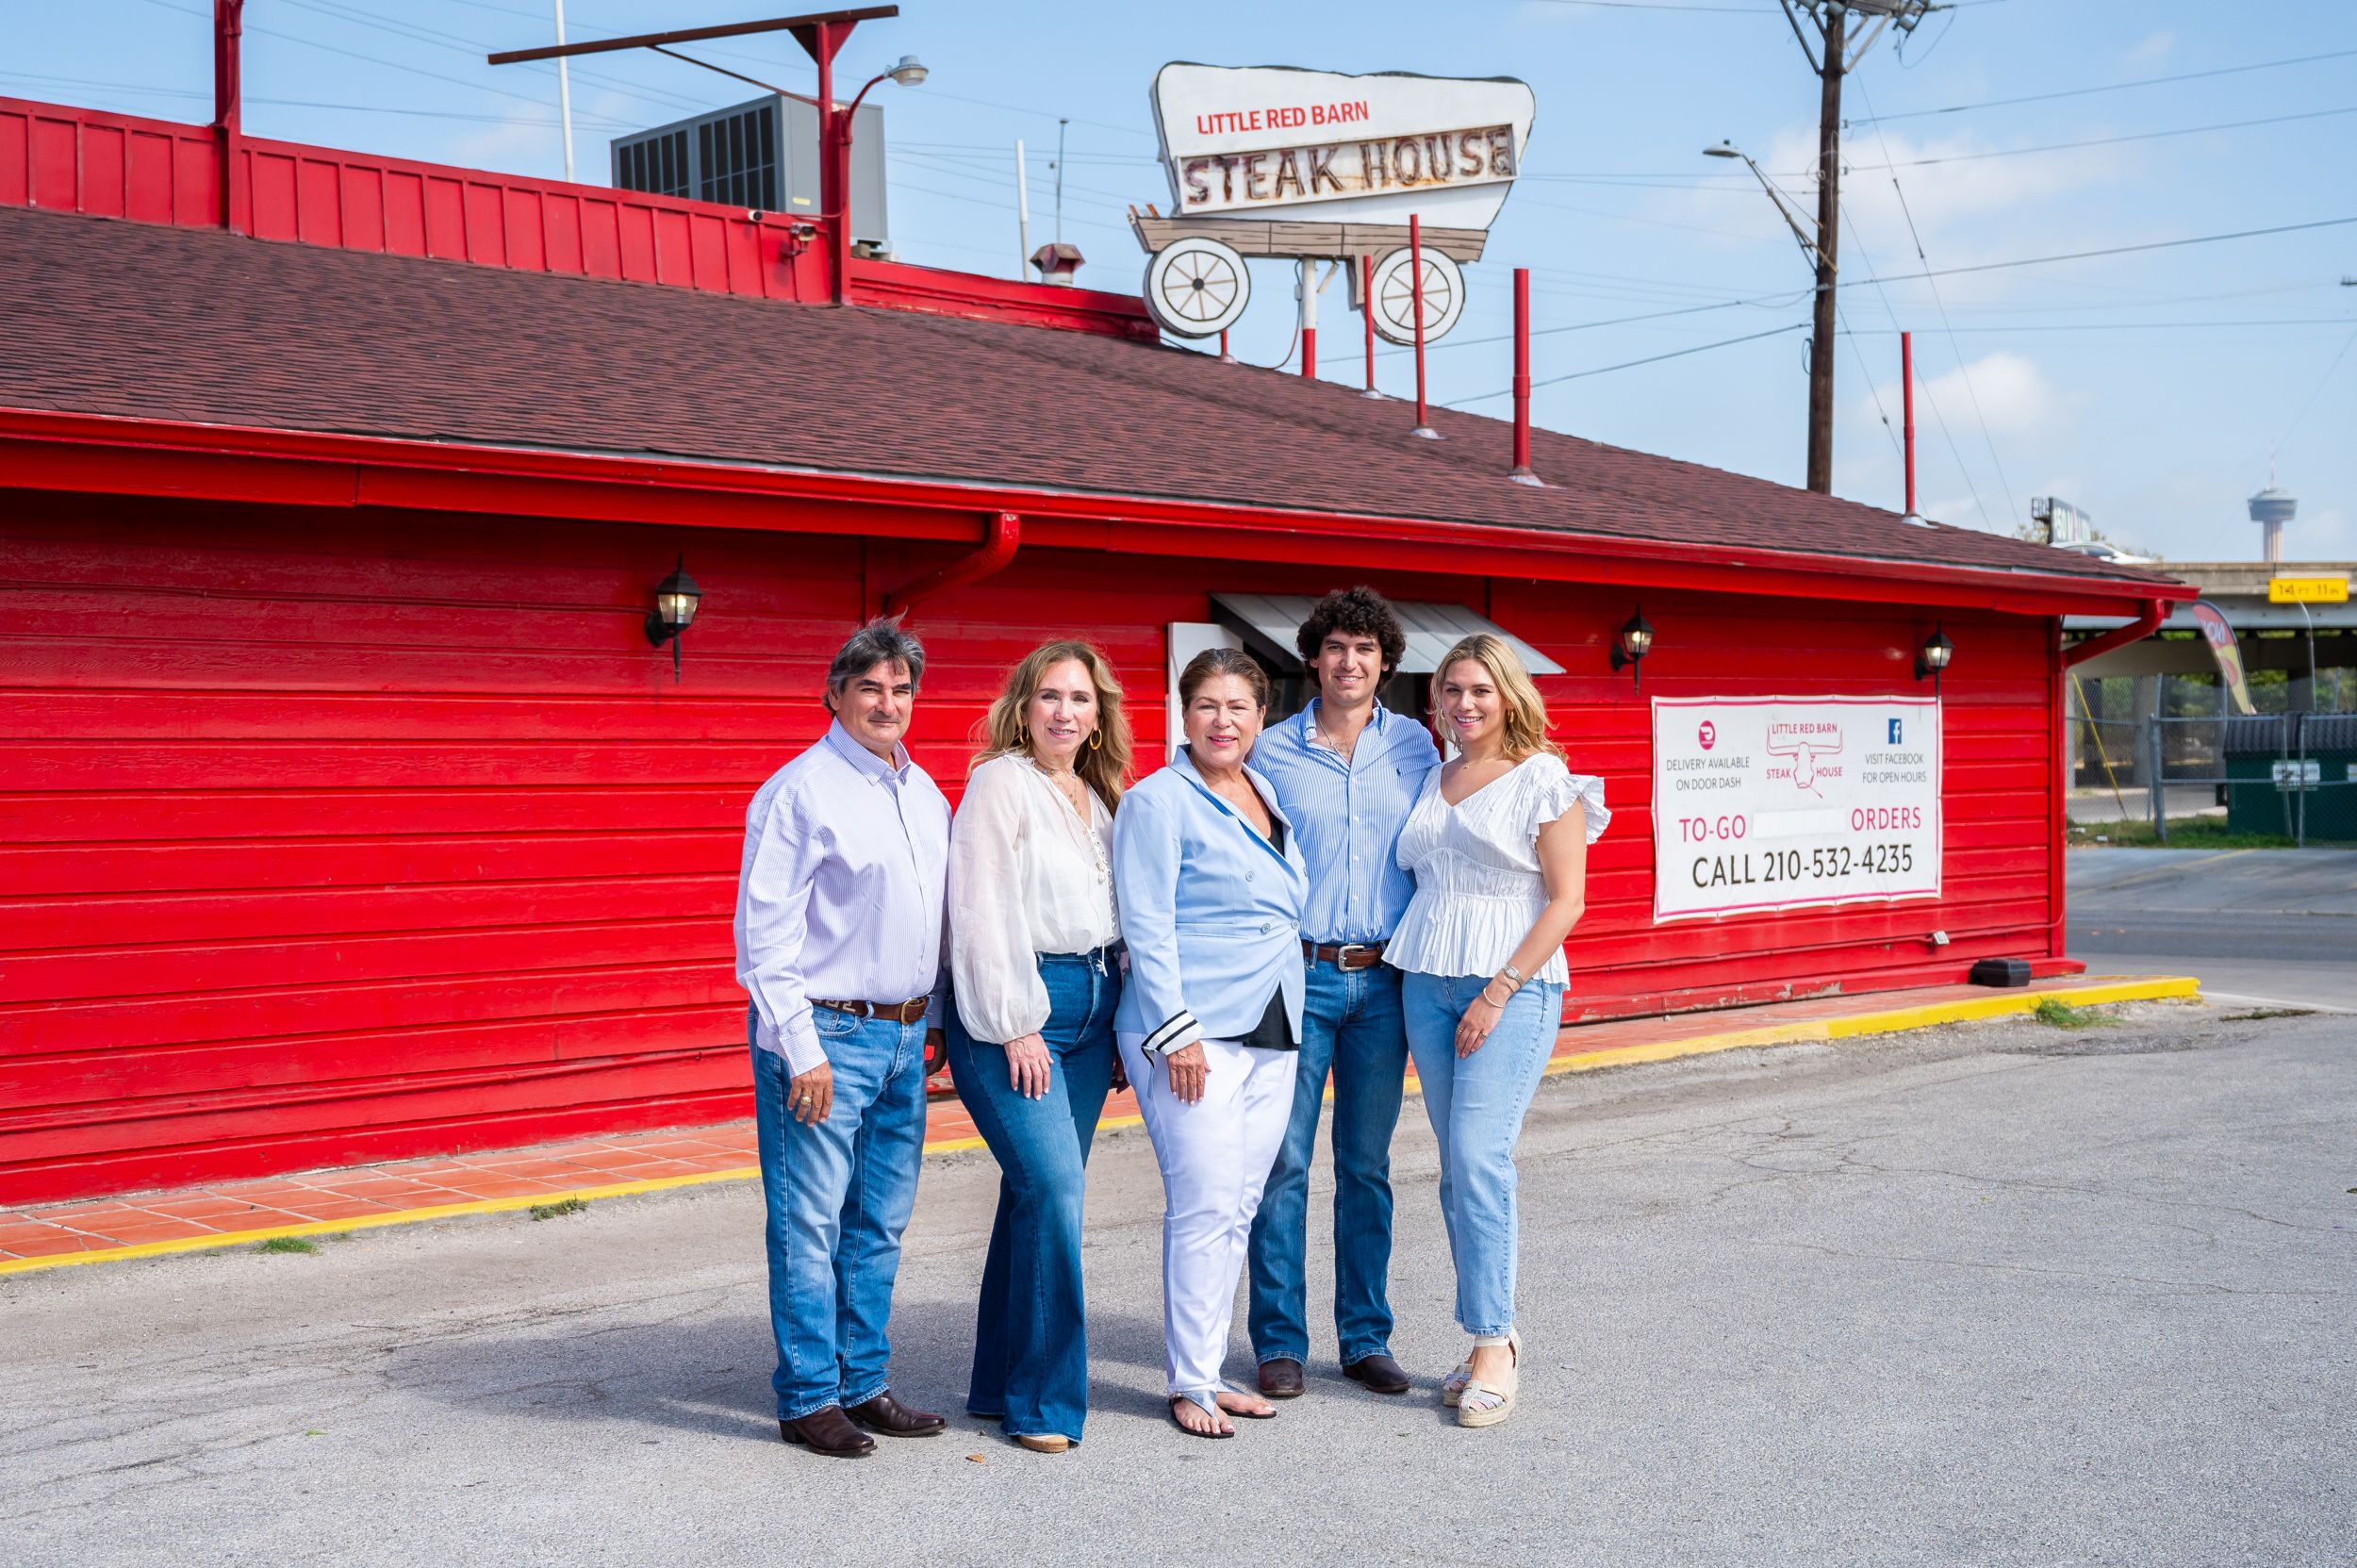 A group of five people stand outside a red restaurant building. 